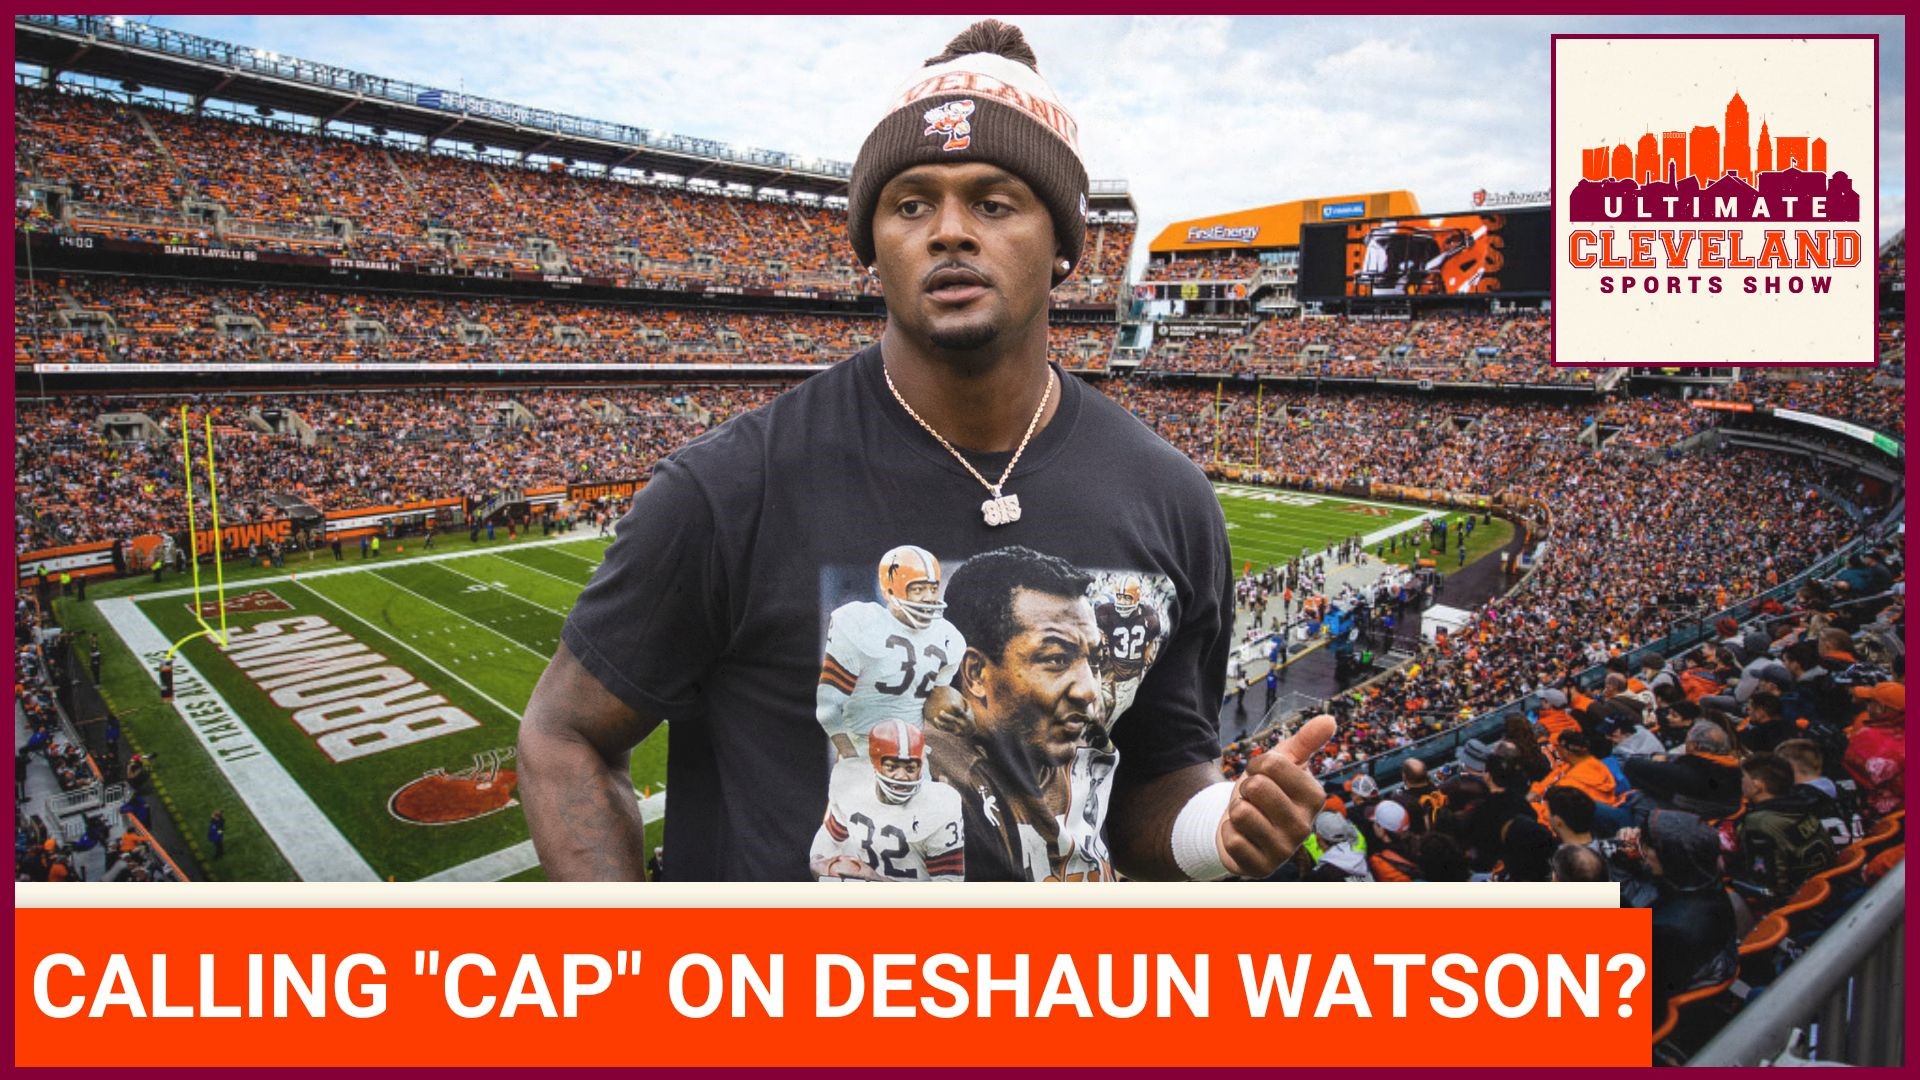 How does Browns QB Deshaun Watson rank among the elite QBs in the league?